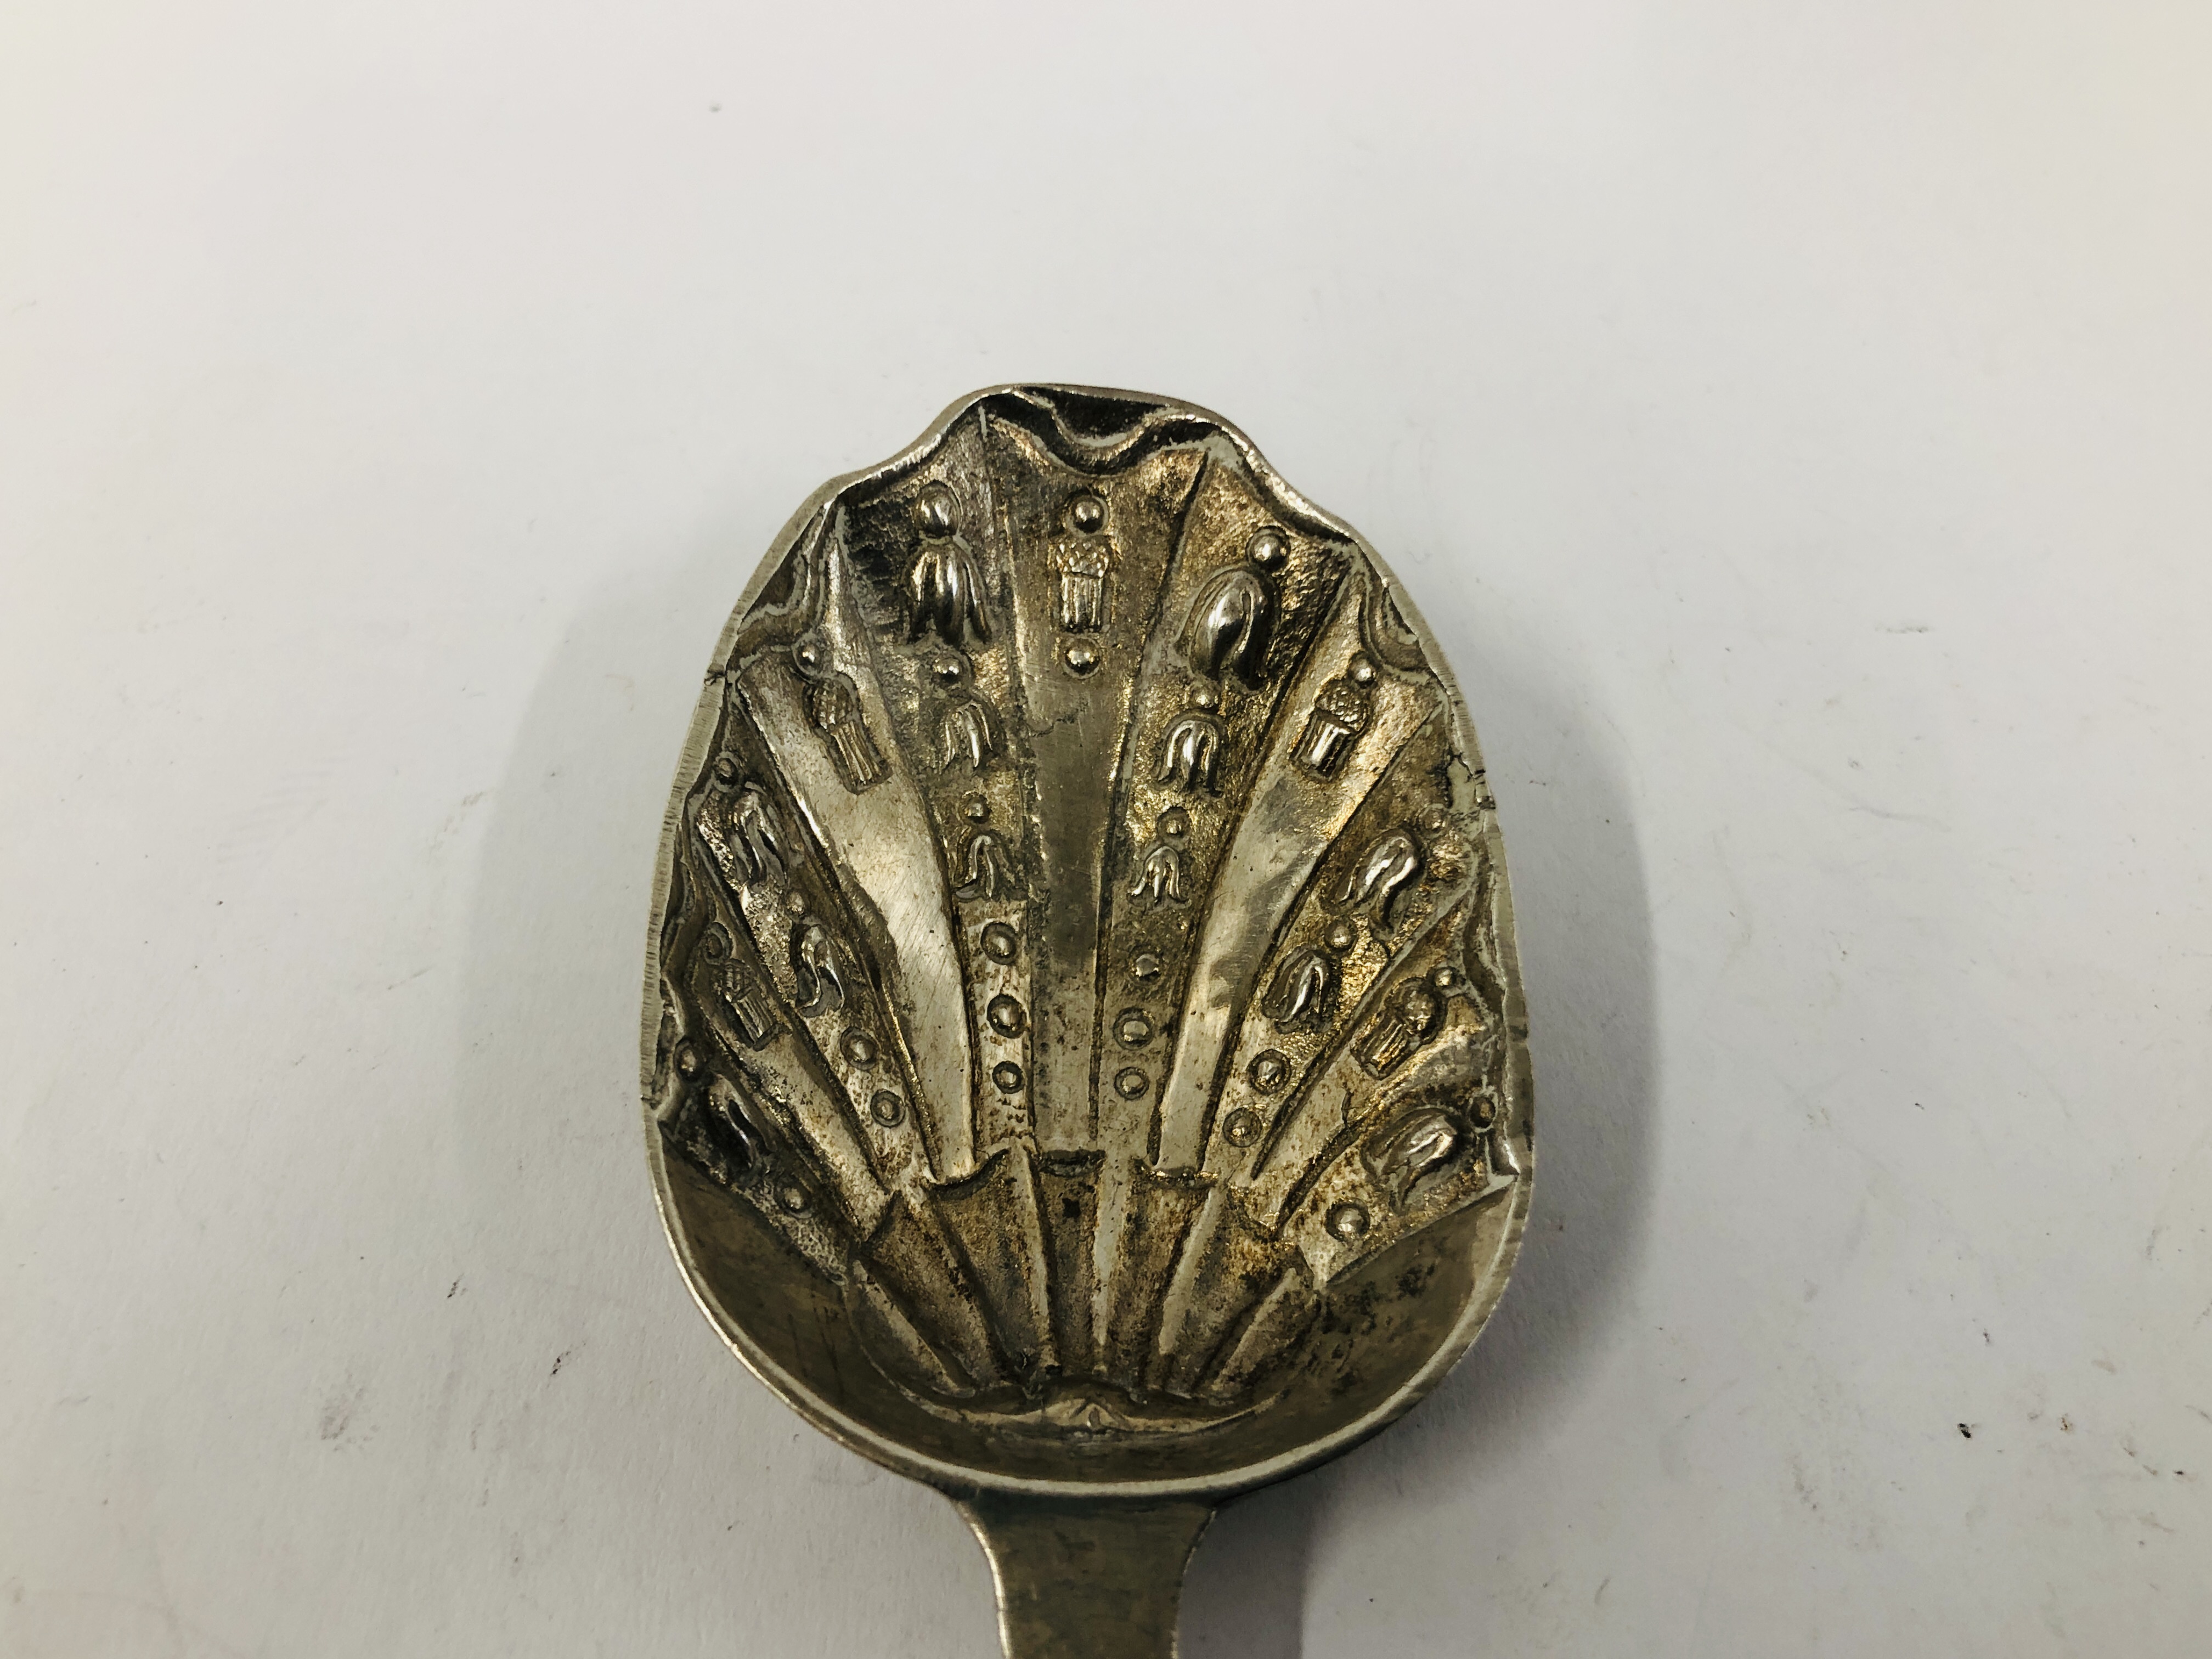 A CONTINENTAL SILVER CADDY SPOON THE HANDLE ENCLOSING A DOG IMPORTED BY BERTHULD MULLER CHESTER - Image 4 of 9